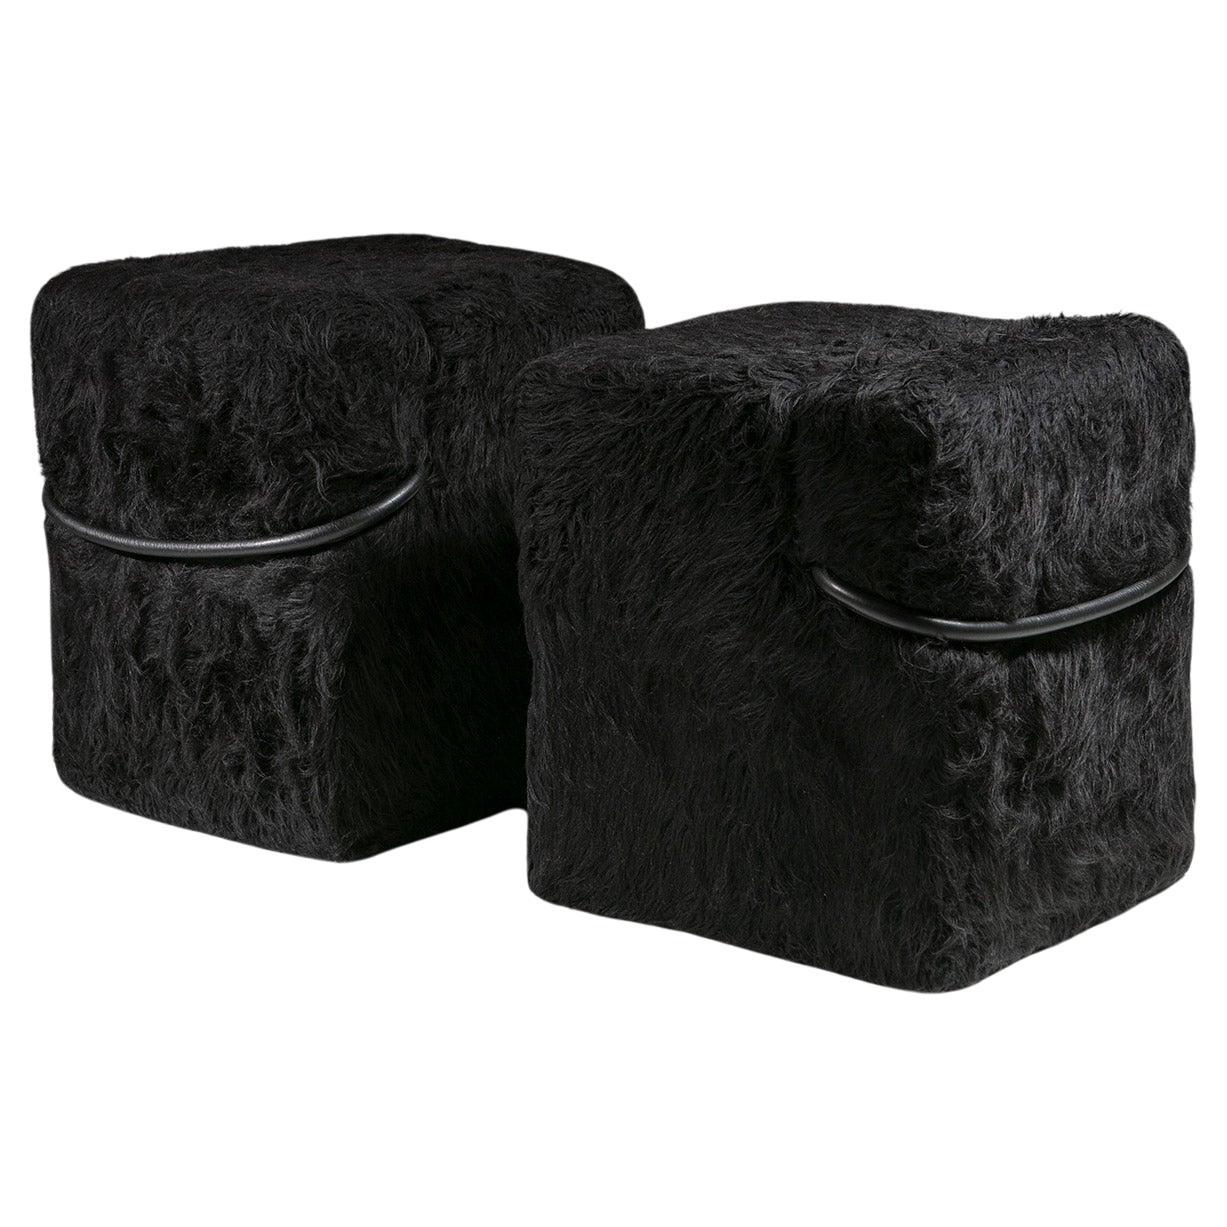 Pair of Furry "Blocco" Early Edition Chairs by Nanda Vigo, Driade, Italy, 1970s For Sale